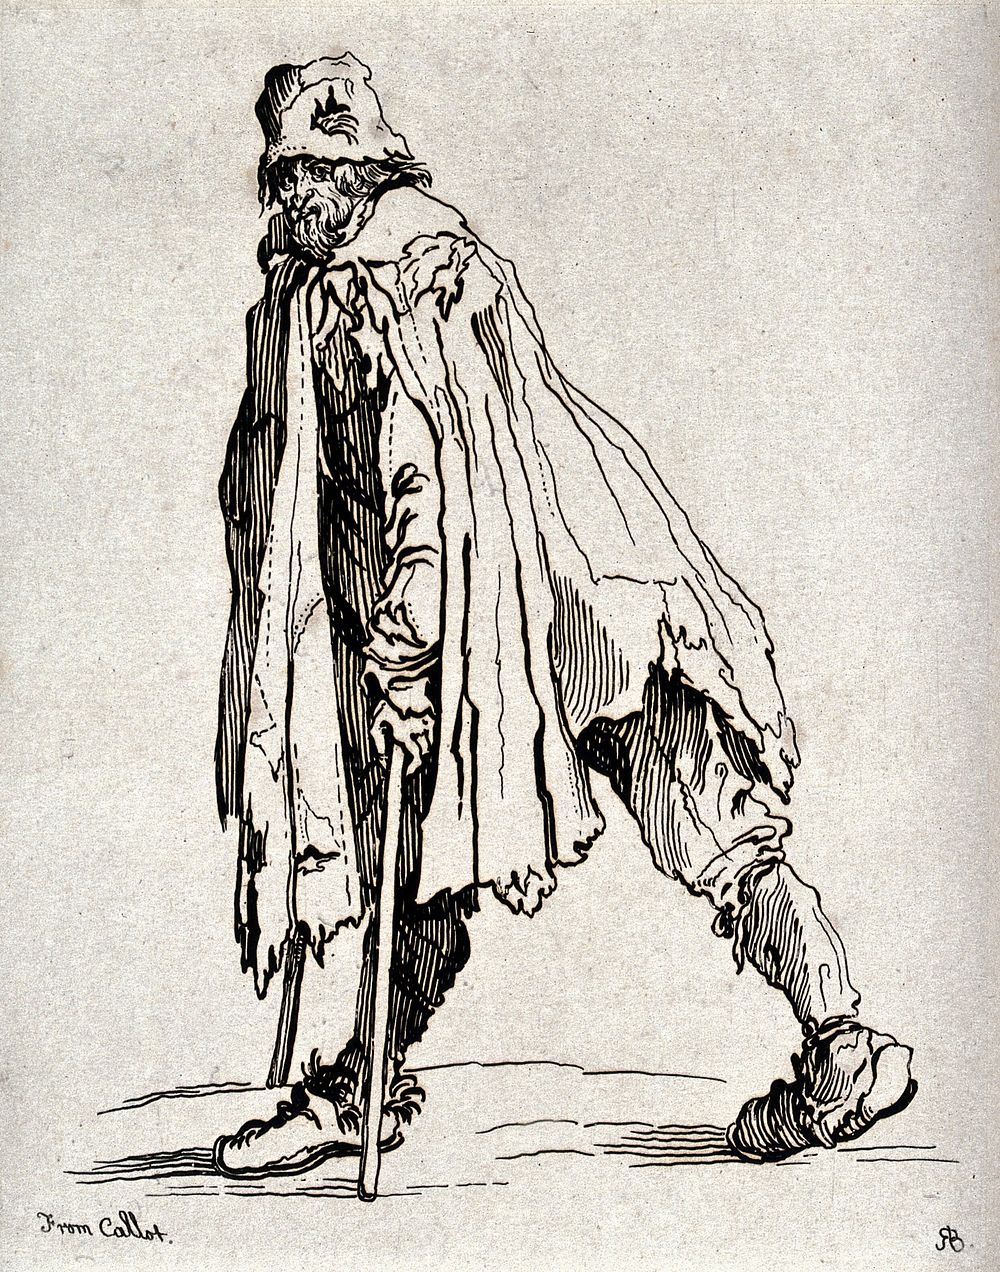 A bearded beggar dressed in rags walking on two crutches. Etching by R. Blake after J. Callot.